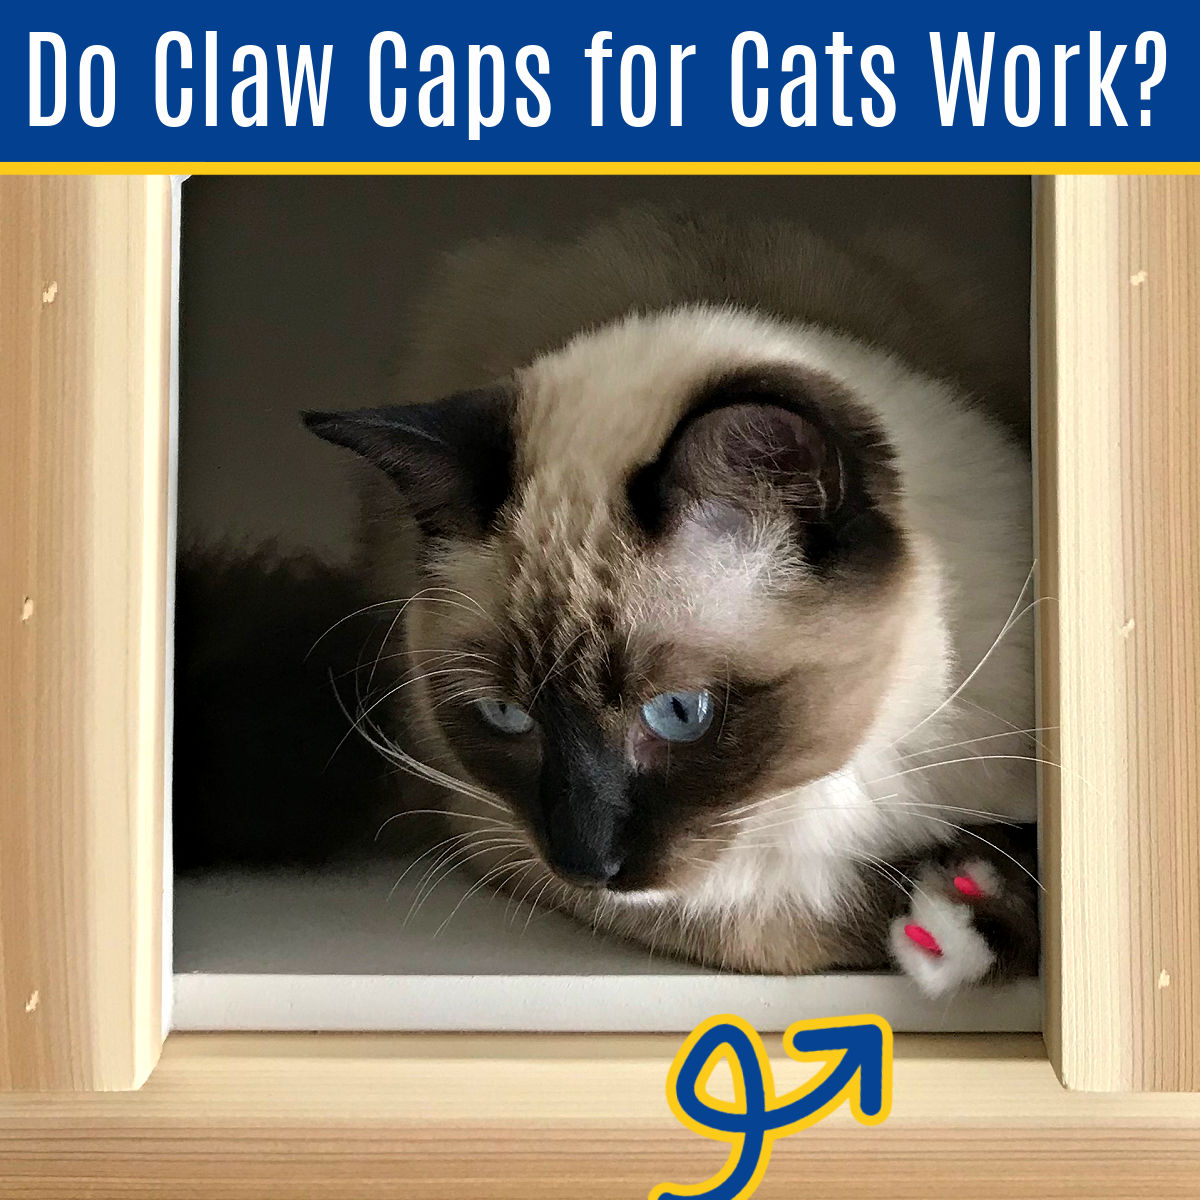 Are Claw Caps Safe for Cats?